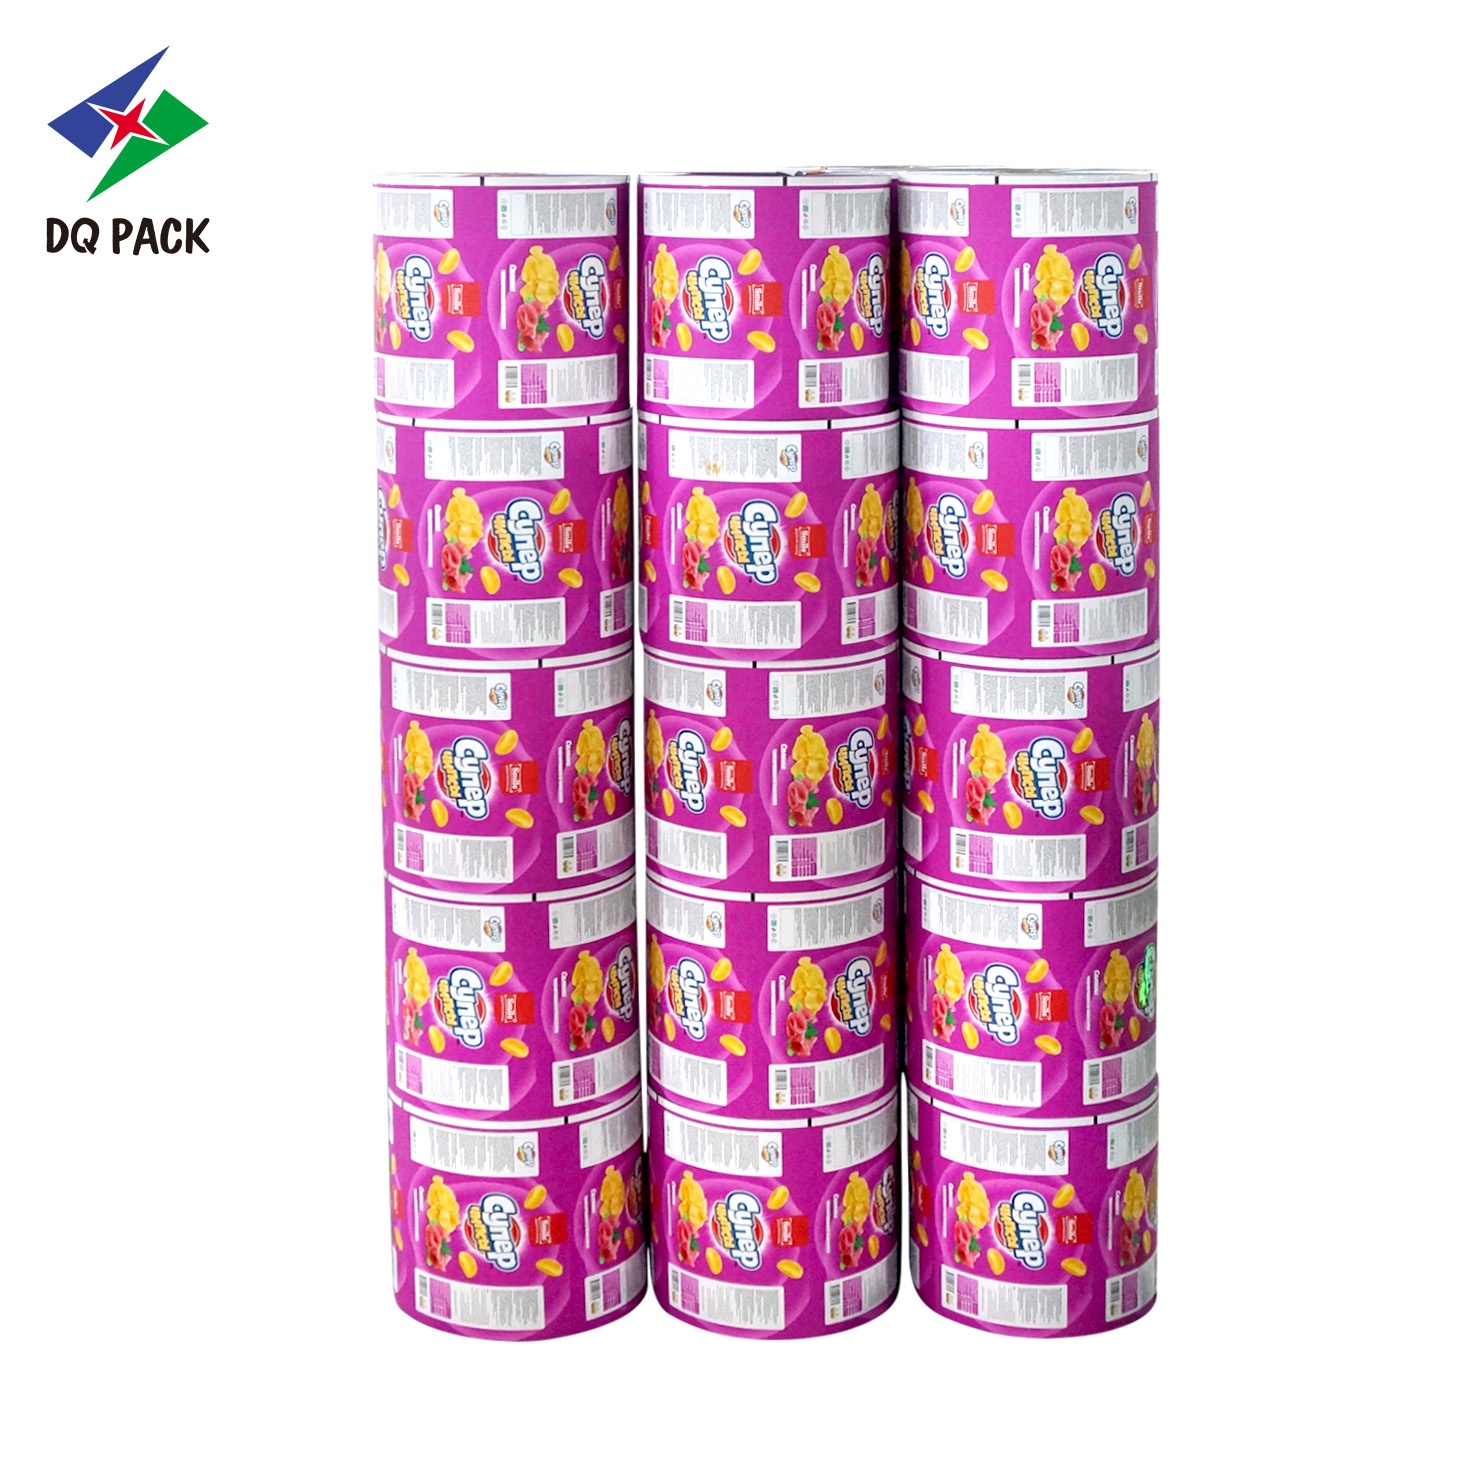 DQ PACK China Supplier Custom Printed BOPP/CPP Food Snack Chips Roll Stock Film Plastic Packaging Film